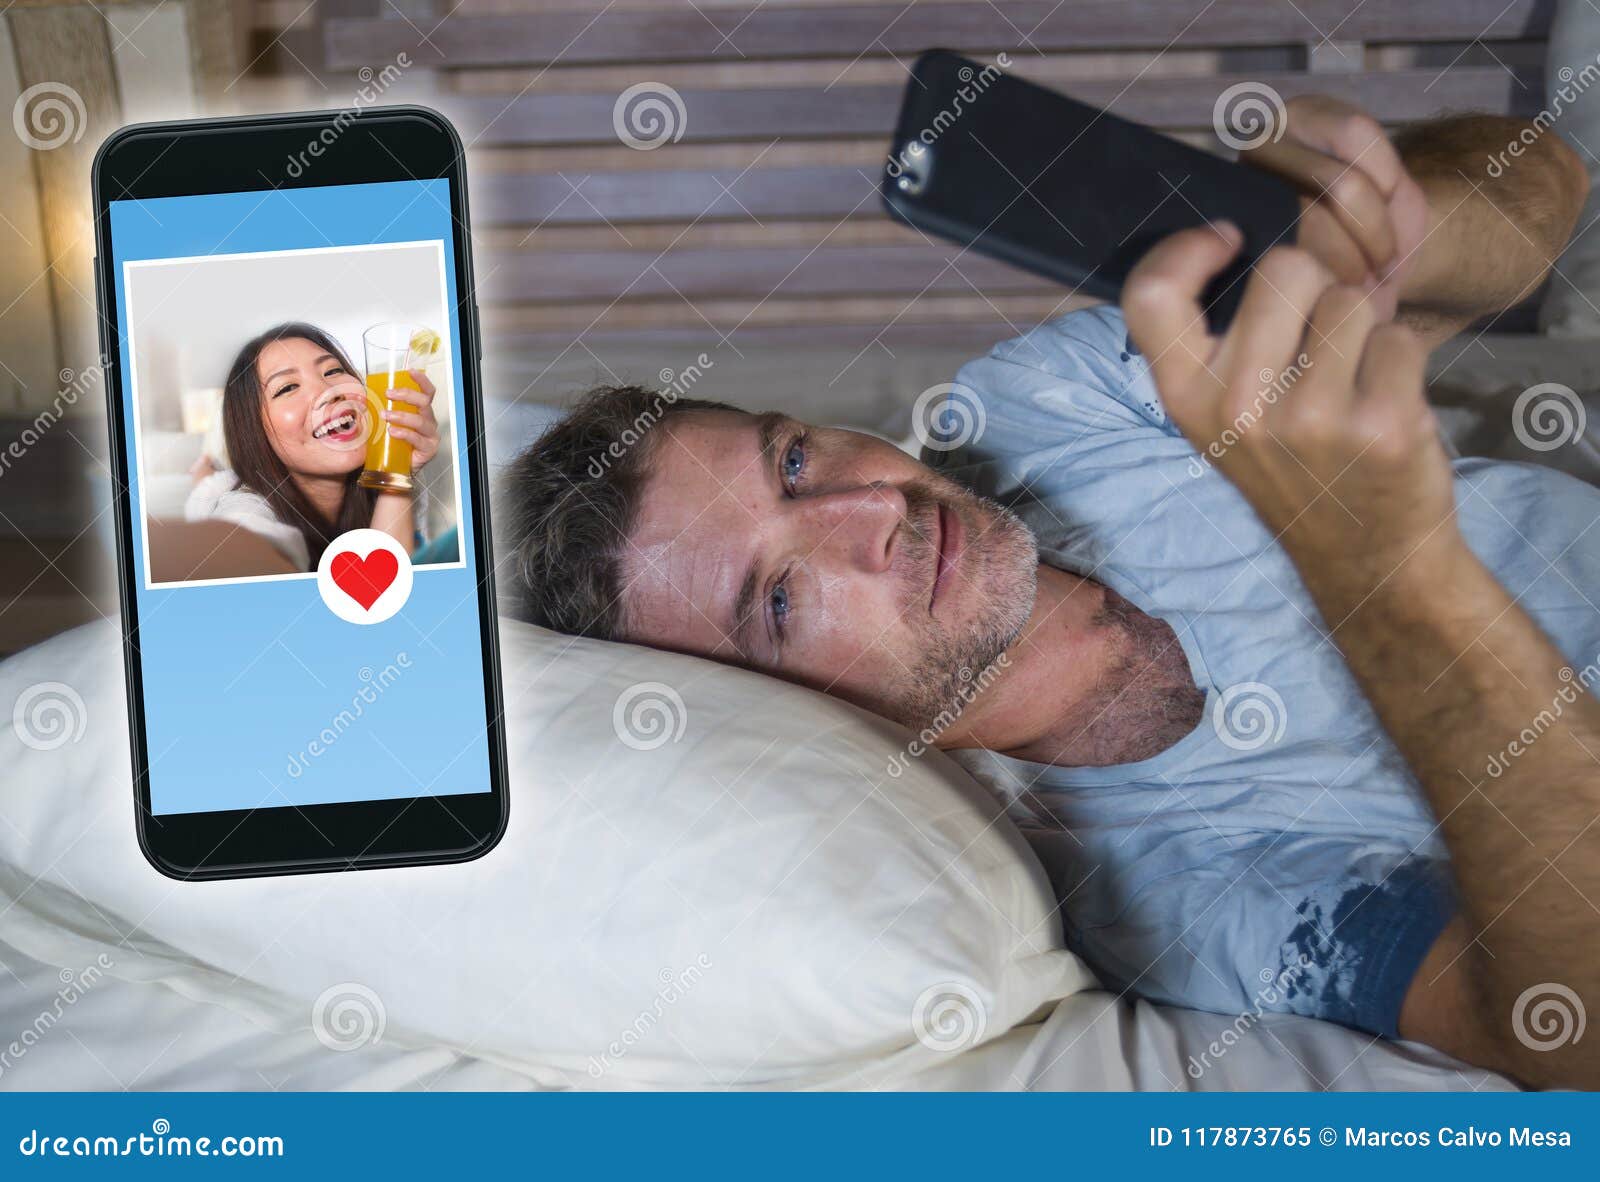 Young Attractive Man Lying in Bed on Line Searching for Sex or Love Finding a Beautiful Girl Profile Sending Like Using Mobile Pho Stock Image photo